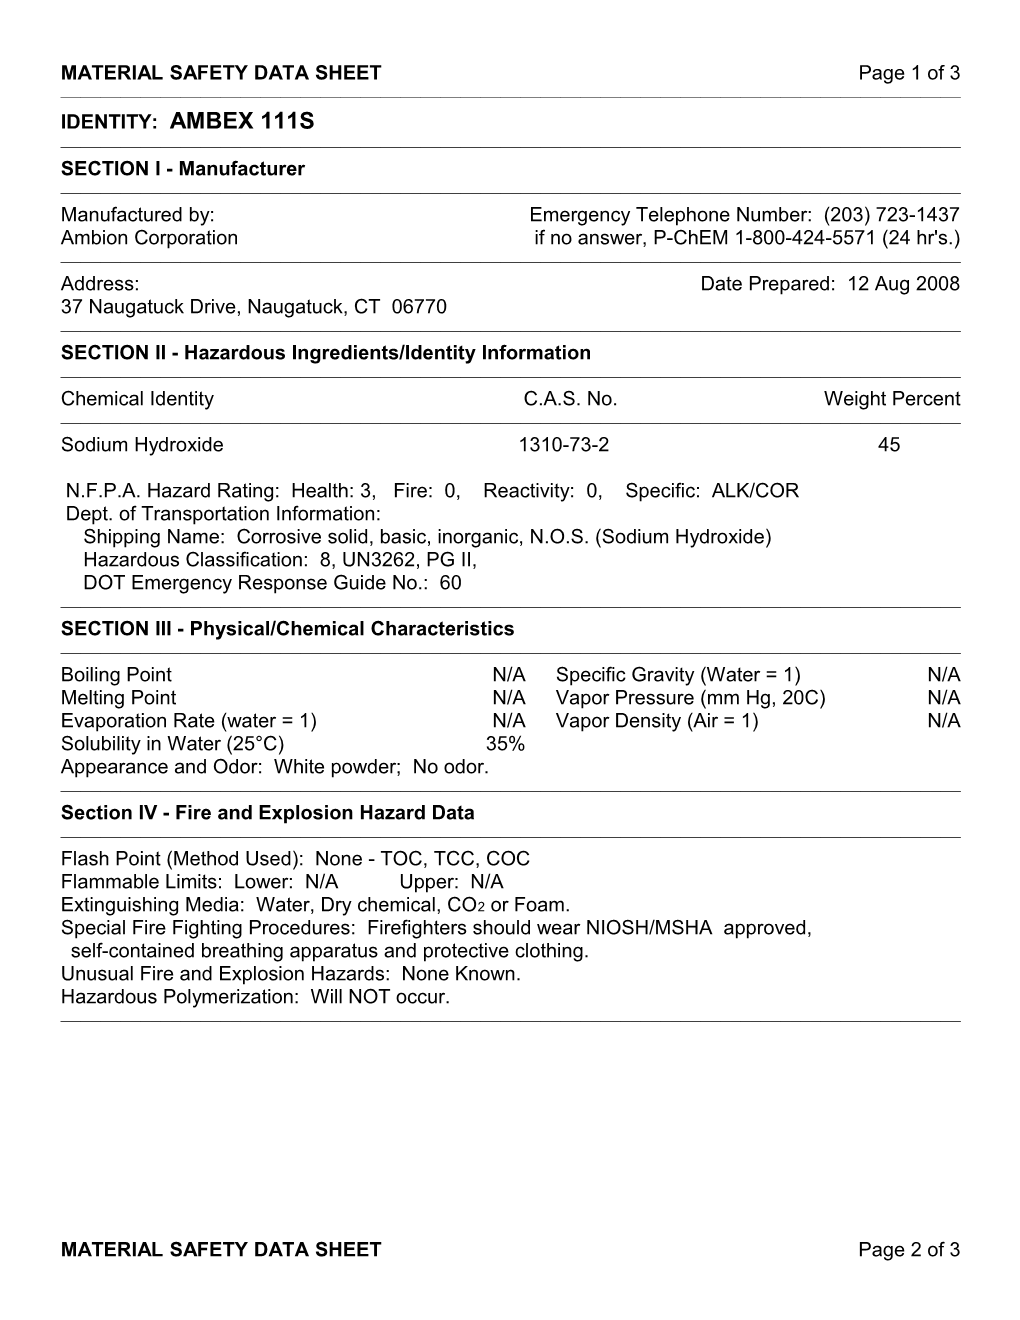 MSDS for Ambex 3158